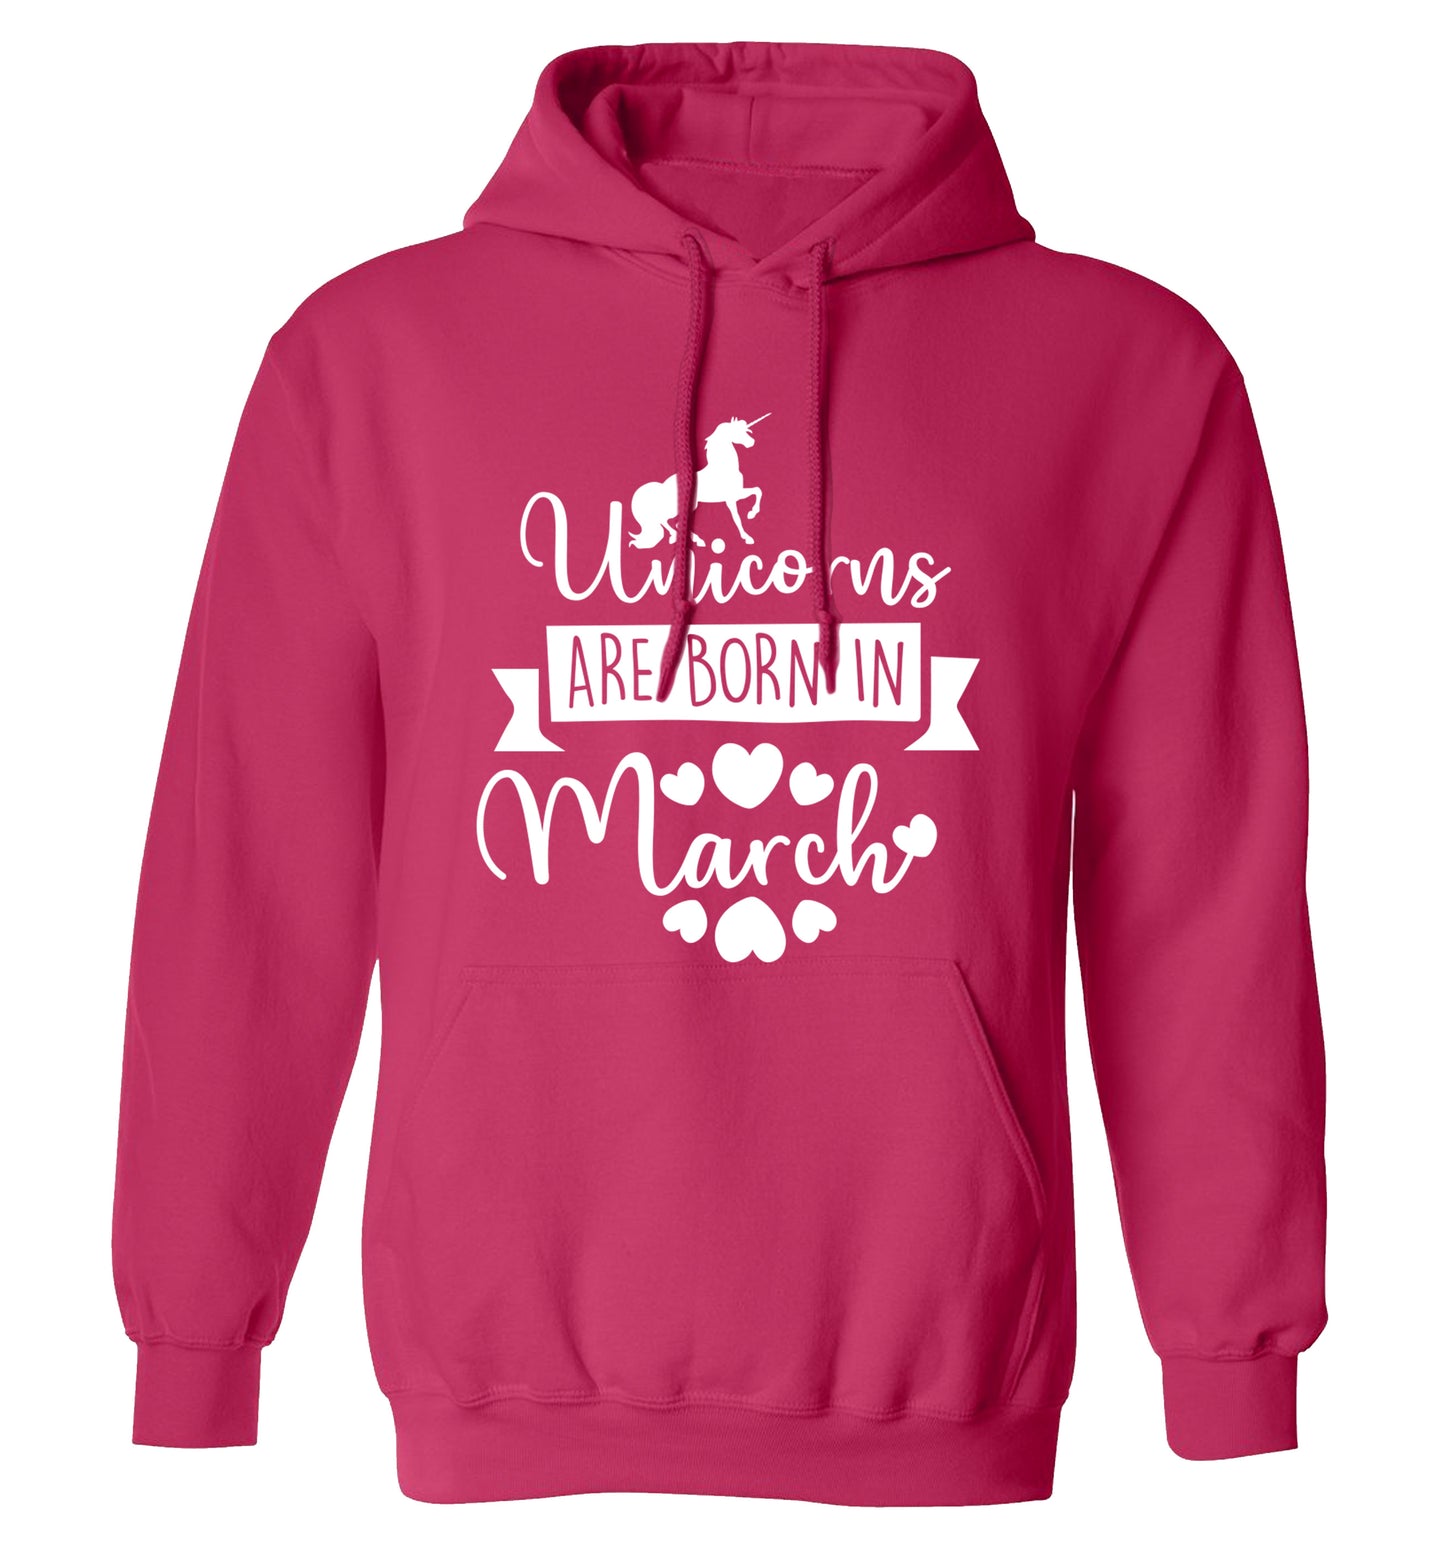 Unicorns are born in March adults unisex pink hoodie 2XL